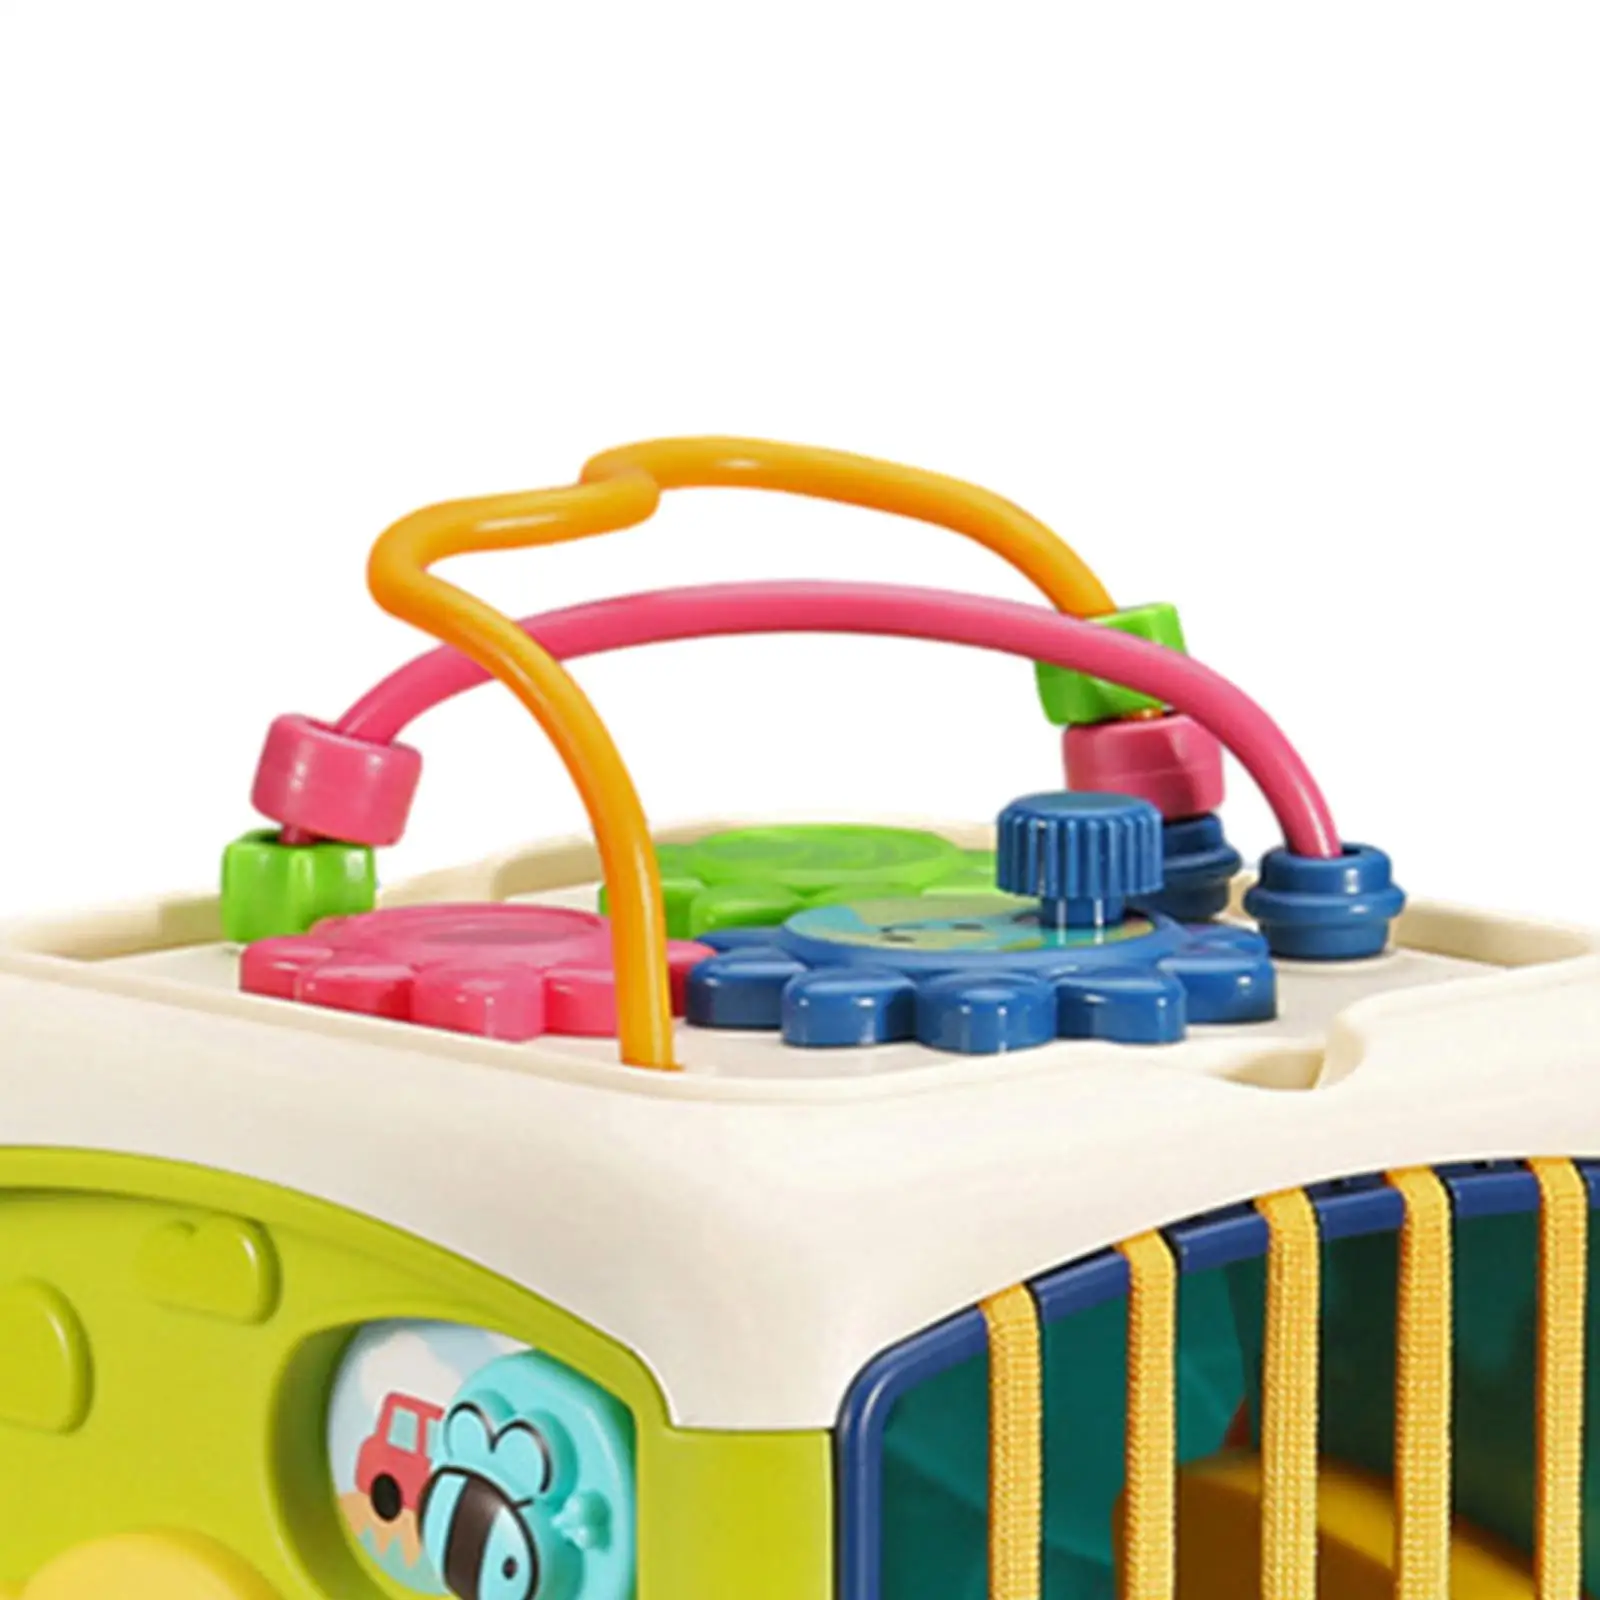 7 in 1 Activity Cube Toy Parent Child Interaction Play The Xylophone, Maze and Gears for Children Birthday Travel Toy